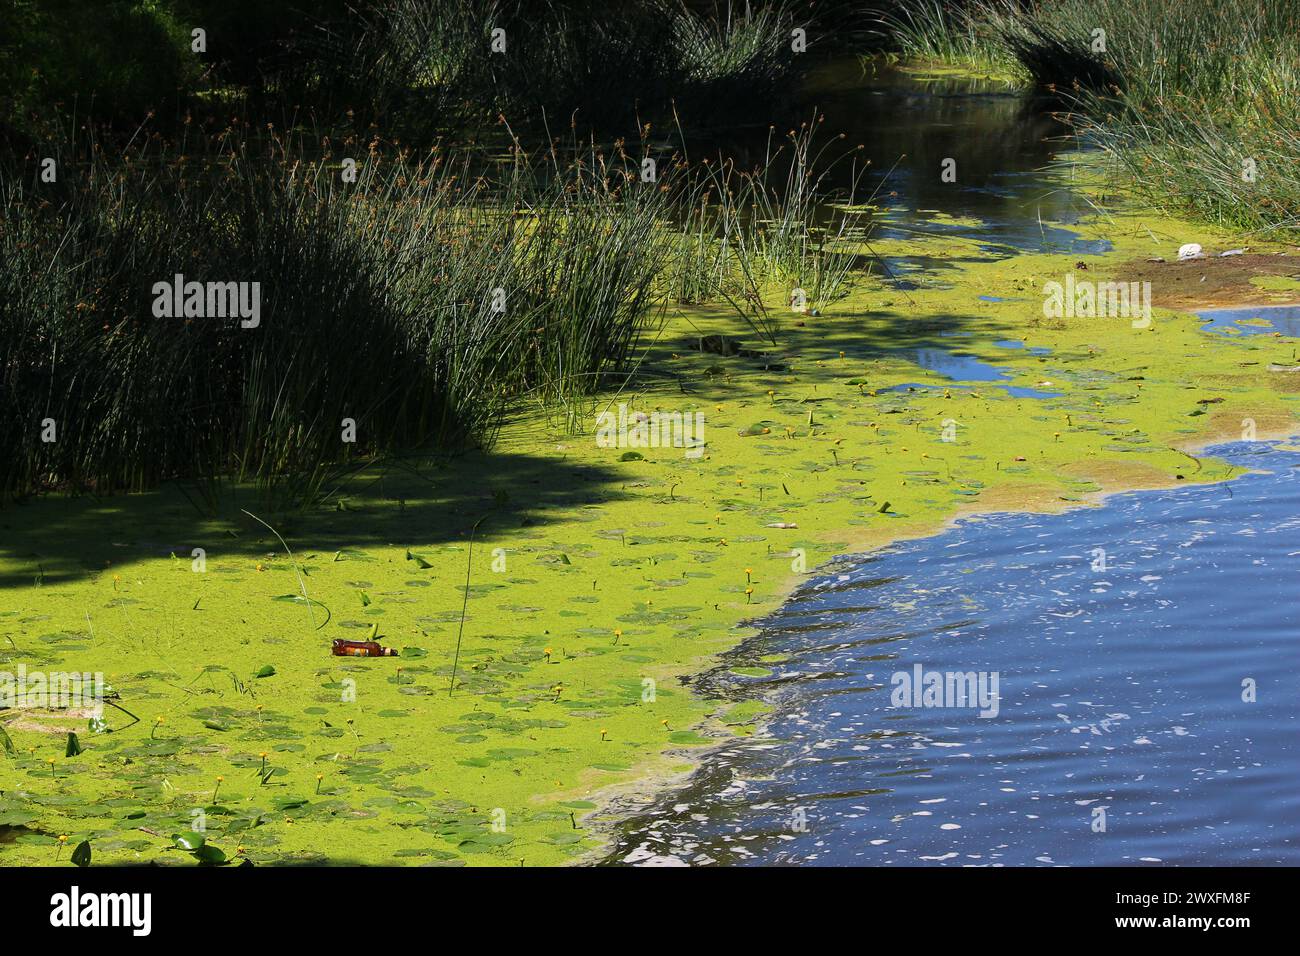 Swampy riverbank with floating debris Stock Photo